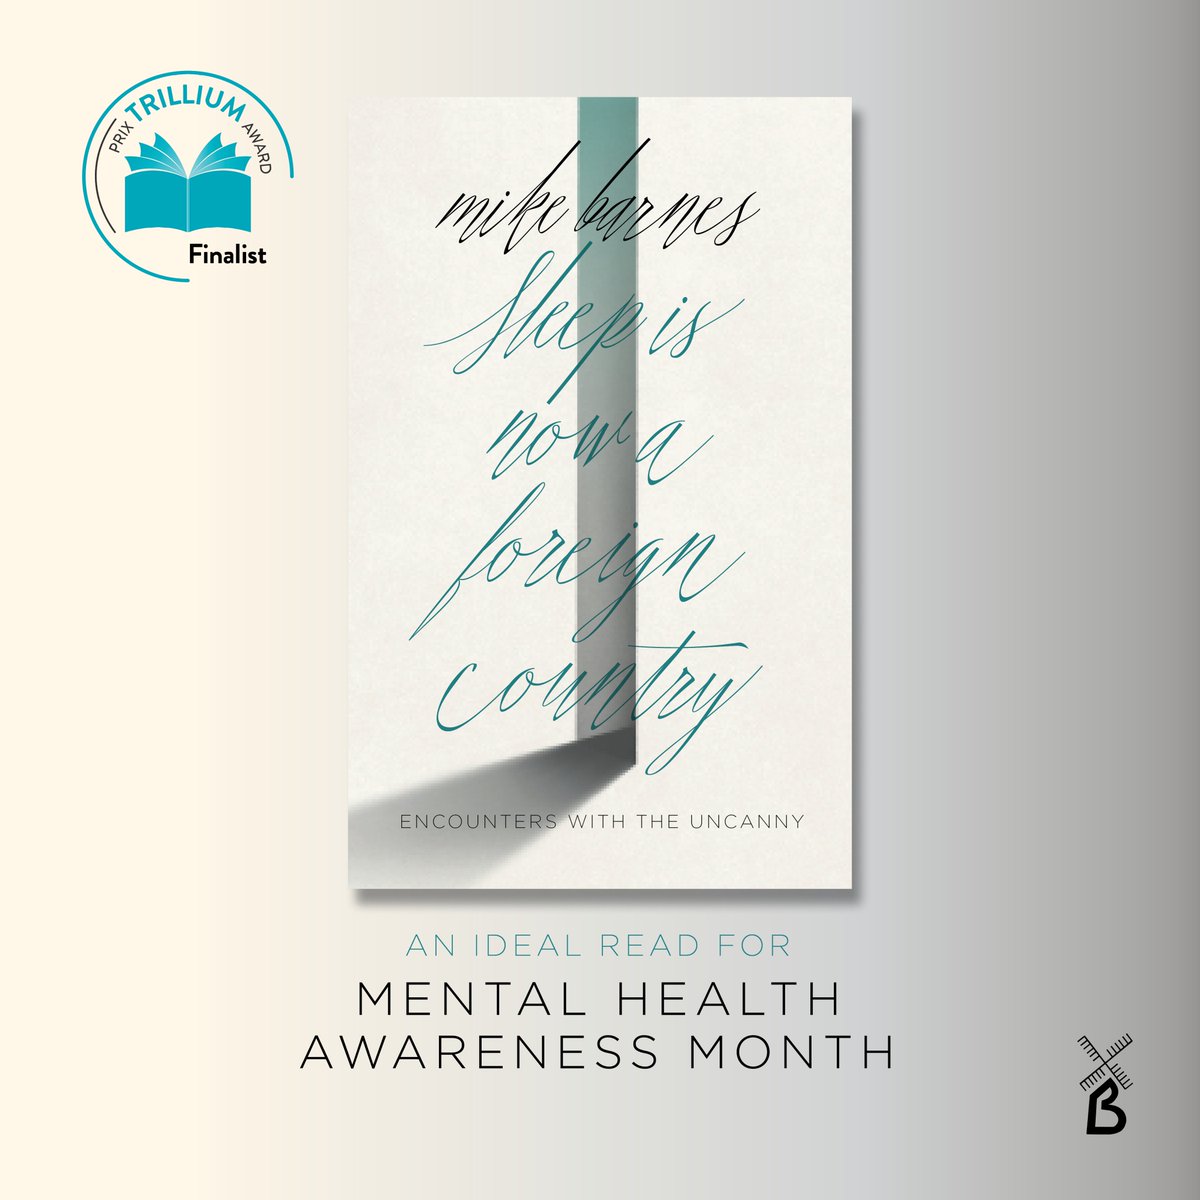 May is Mental Health Awareness Month, and we could not be more proud that Mike Barnes' moving literary memoir, SLEEP IS NOW A FOREIGN COUNTRY is a finalist for The Trillium Book Award - the province of Ontario’s leading literary prize. Order here: biblioasis.com/shop/non-ficti…